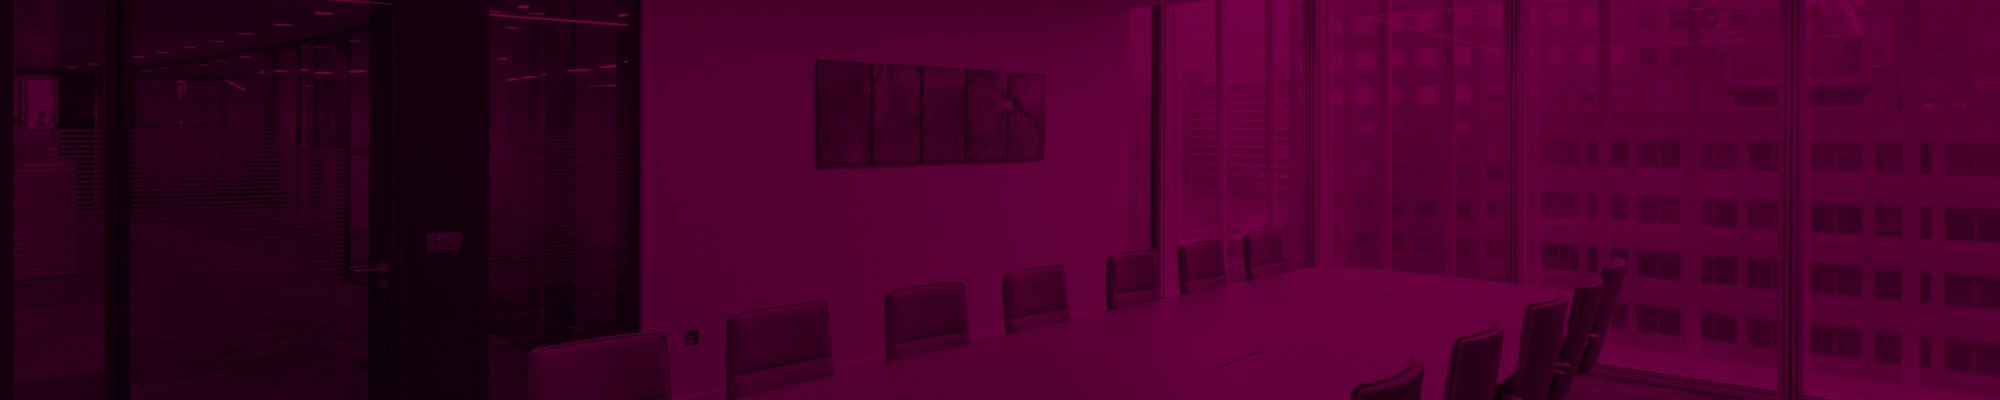 Projects header image - duotone of boardroom